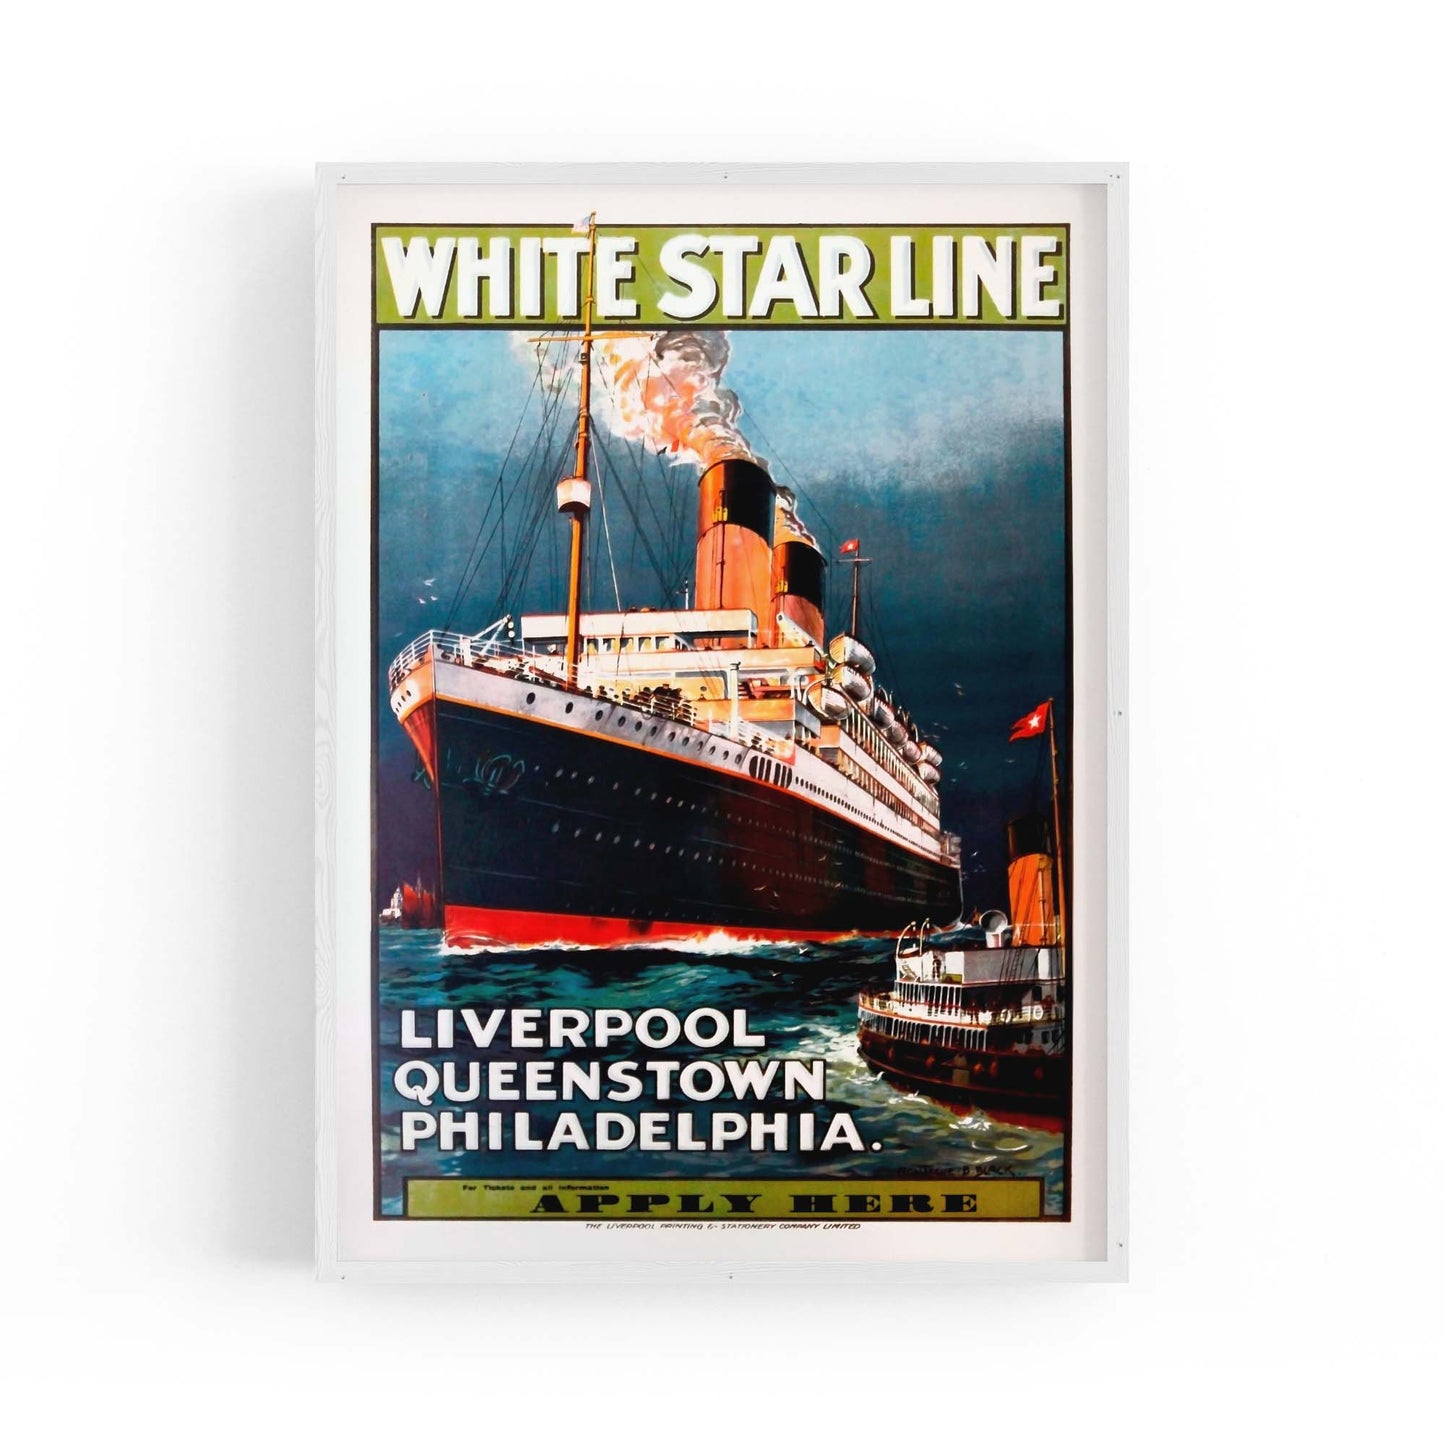 White Star Line Vintage Shipping Advert Wall Art #1 - The Affordable Art Company